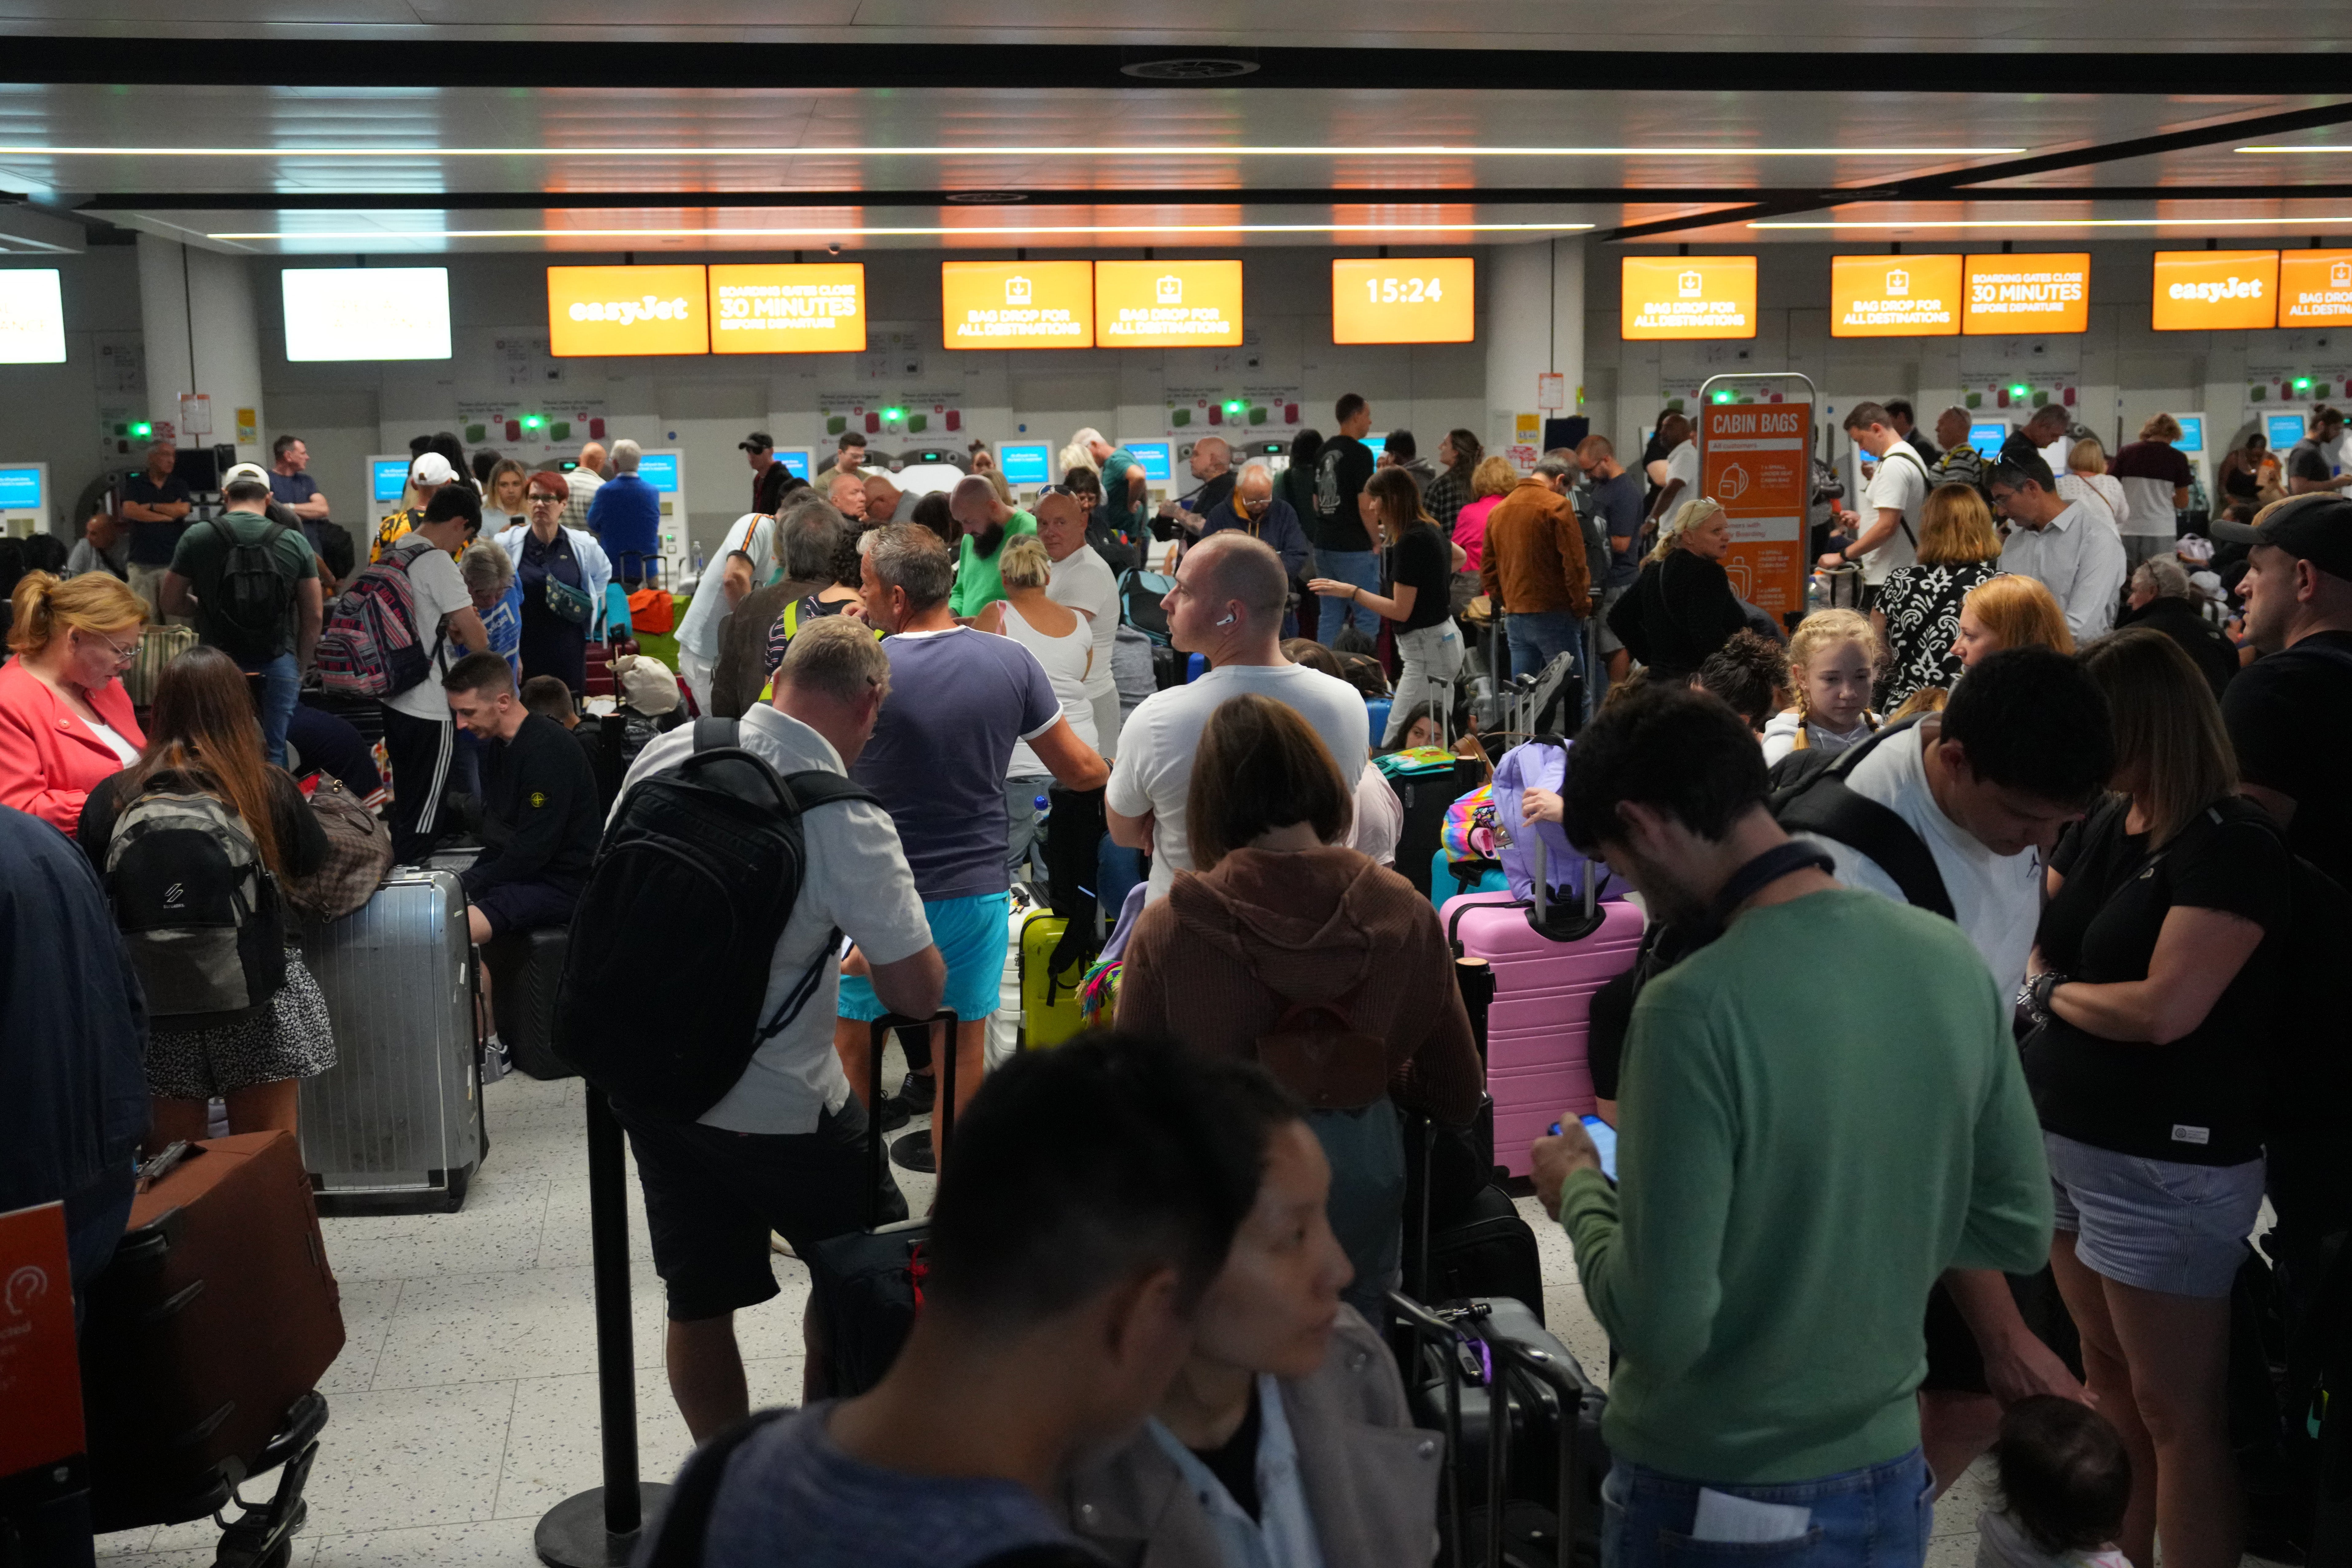 All flights to and from the UK are reported to be affected and delays could last for days